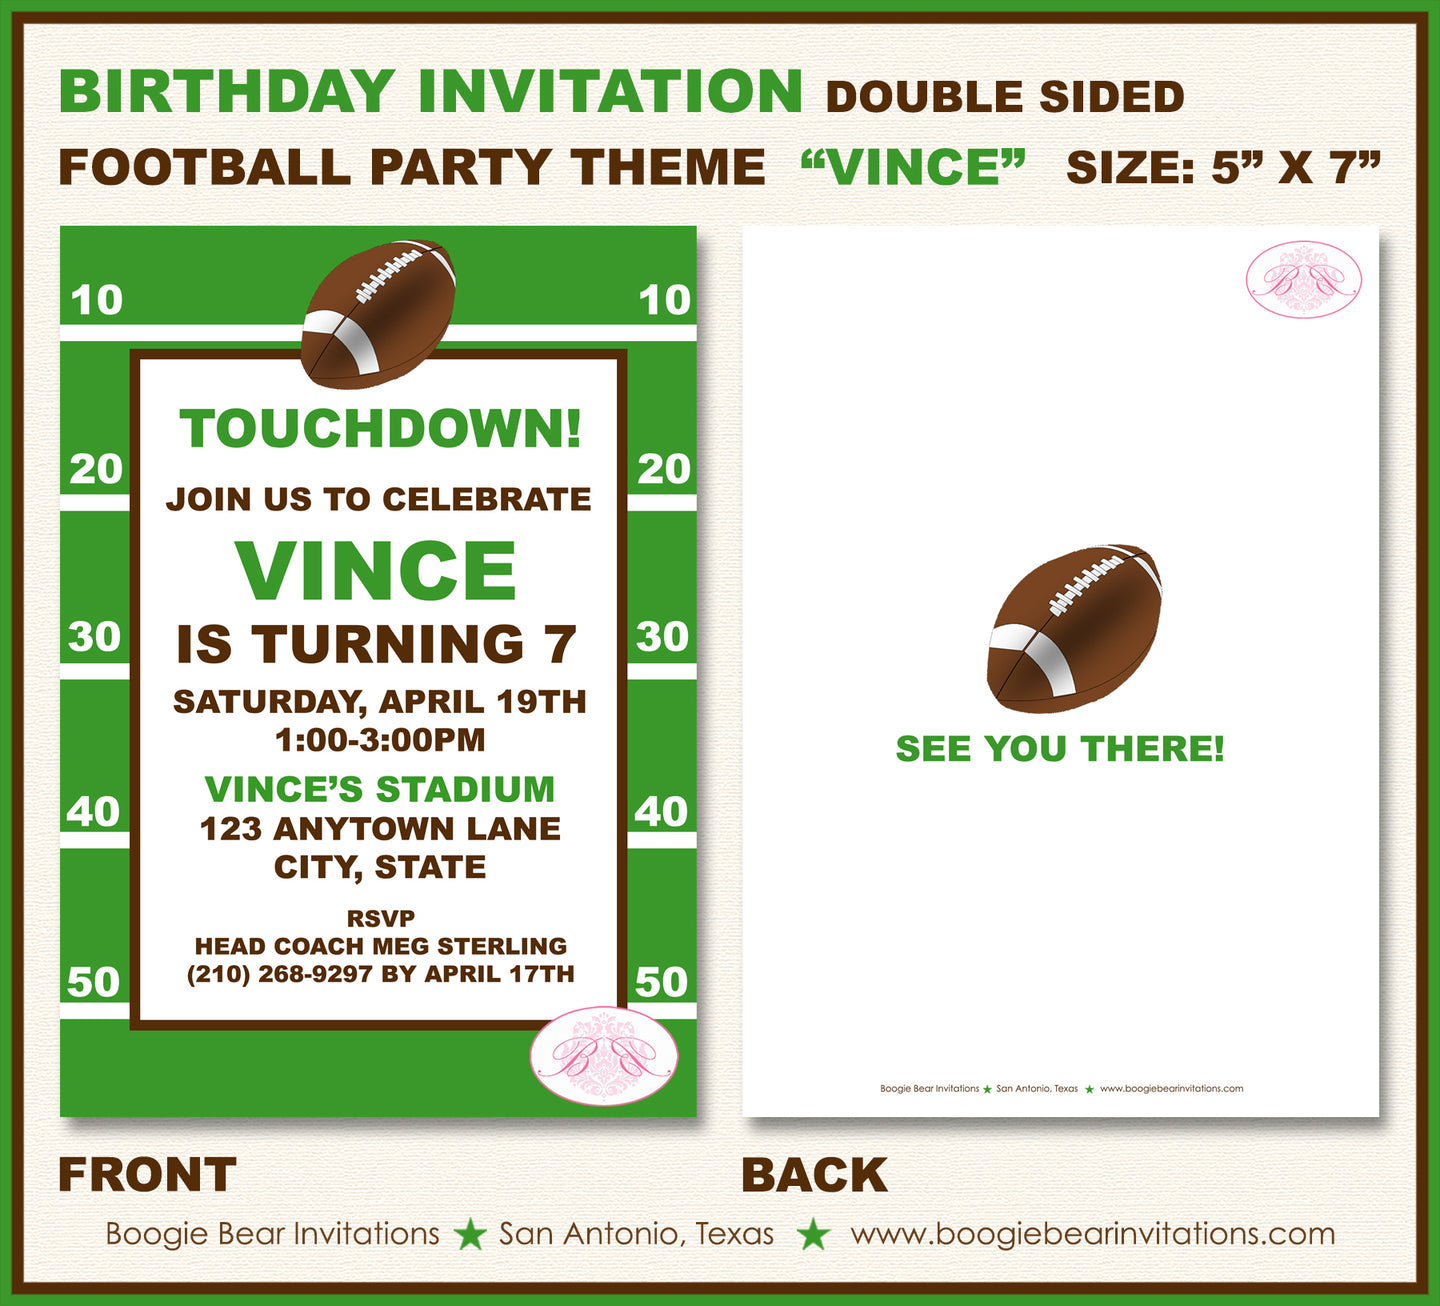 Football Team Birthday Party Invitation Foot Ball Game Boogie Bear Invitations Vince Theme Paperless Printable Printed